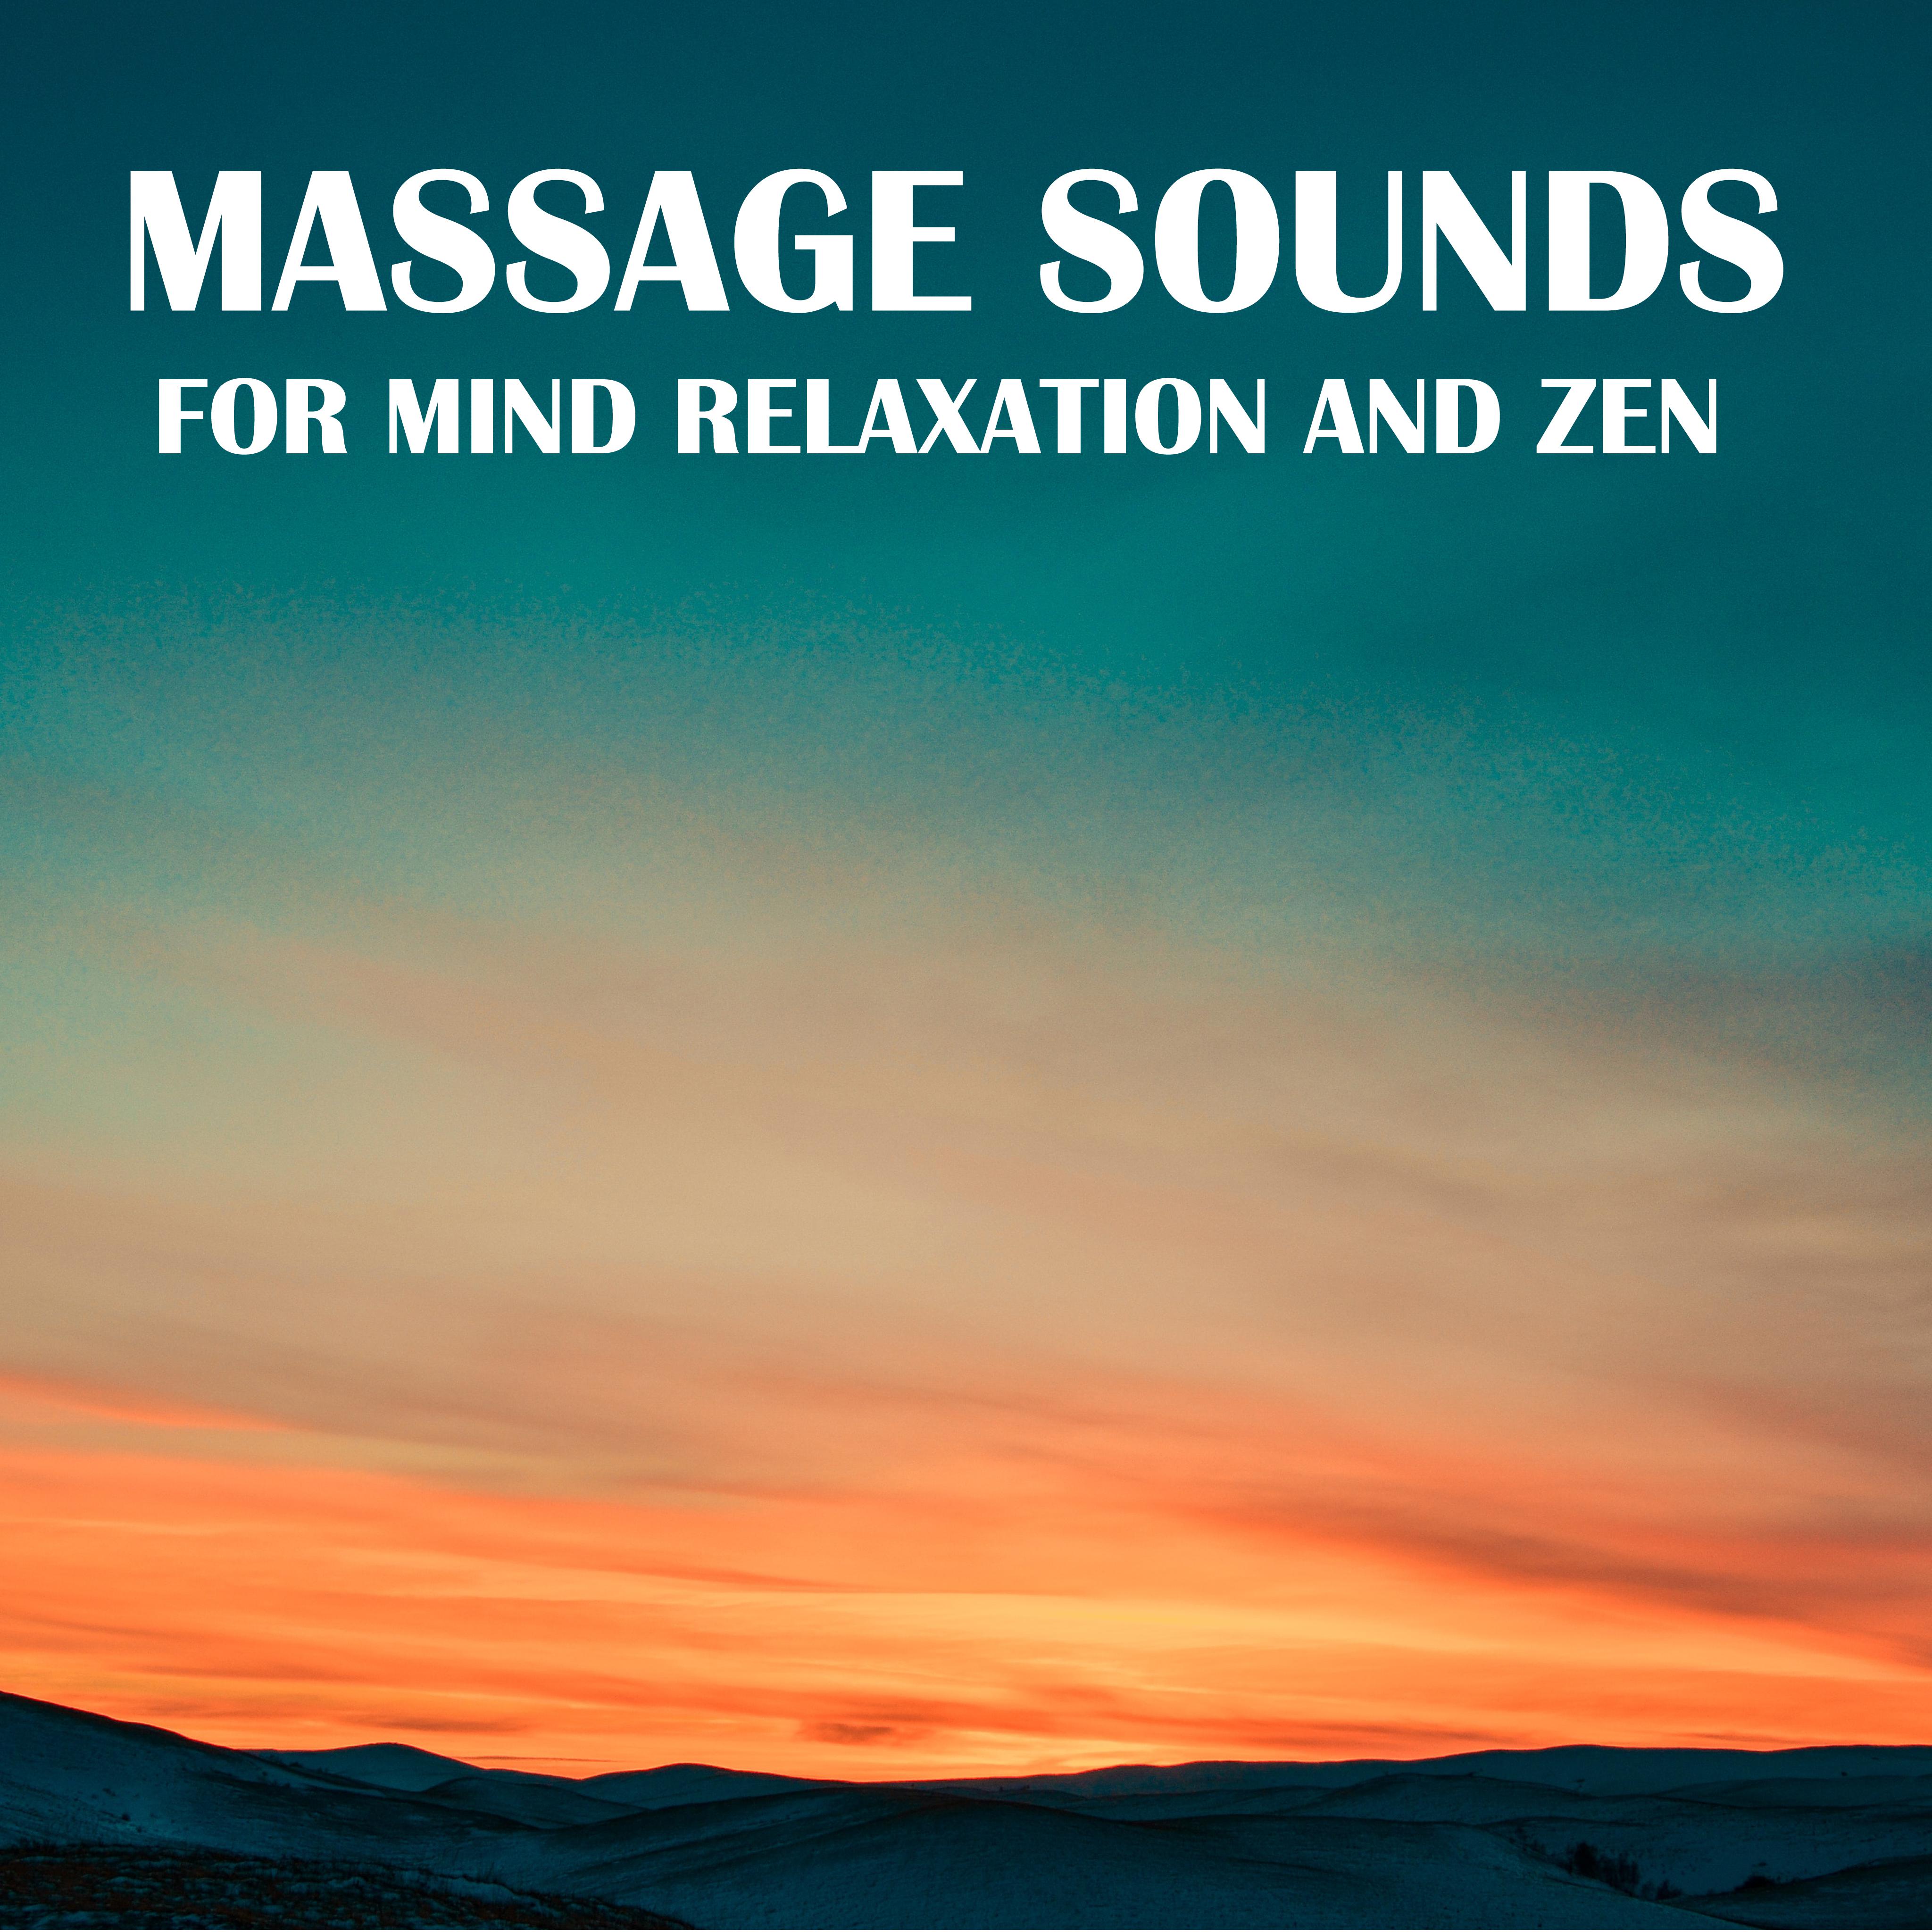 10 Massage Sounds for Mind Relaxation and Zen